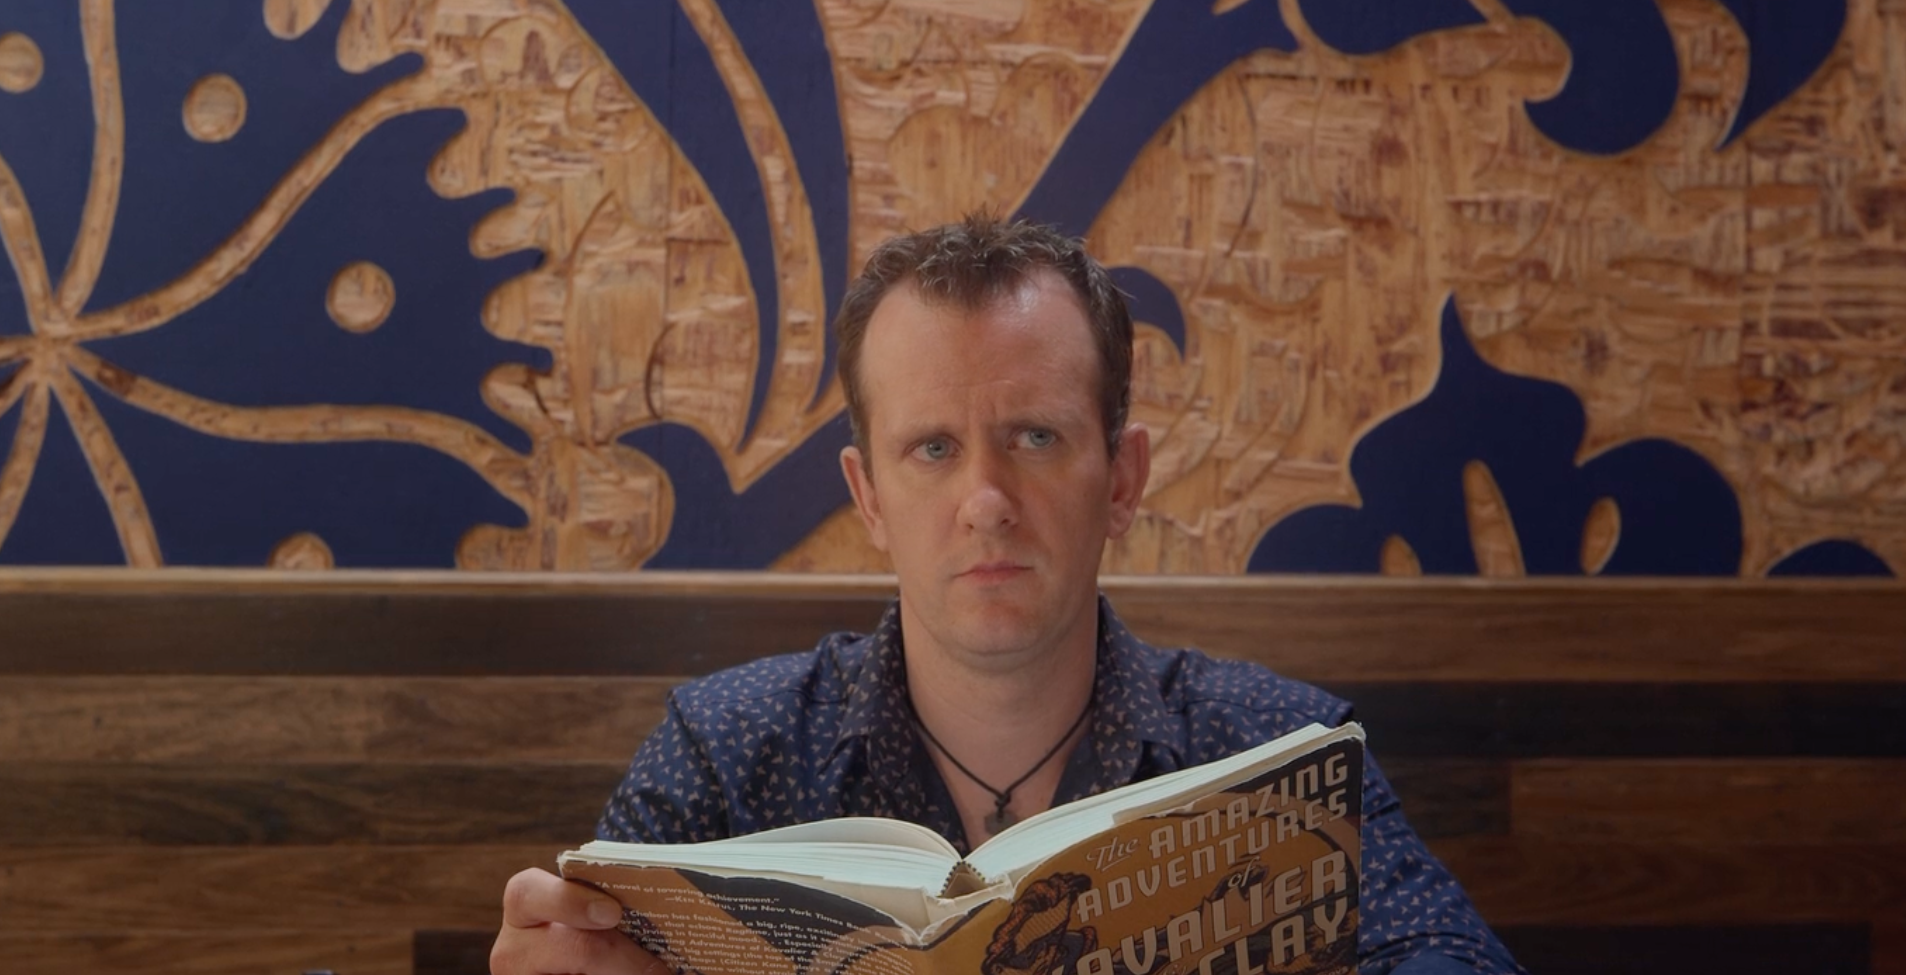 Film still of a man looking up from his book with a curious expression. He appears to be sitting in a booth in an earthy, eclectic café.